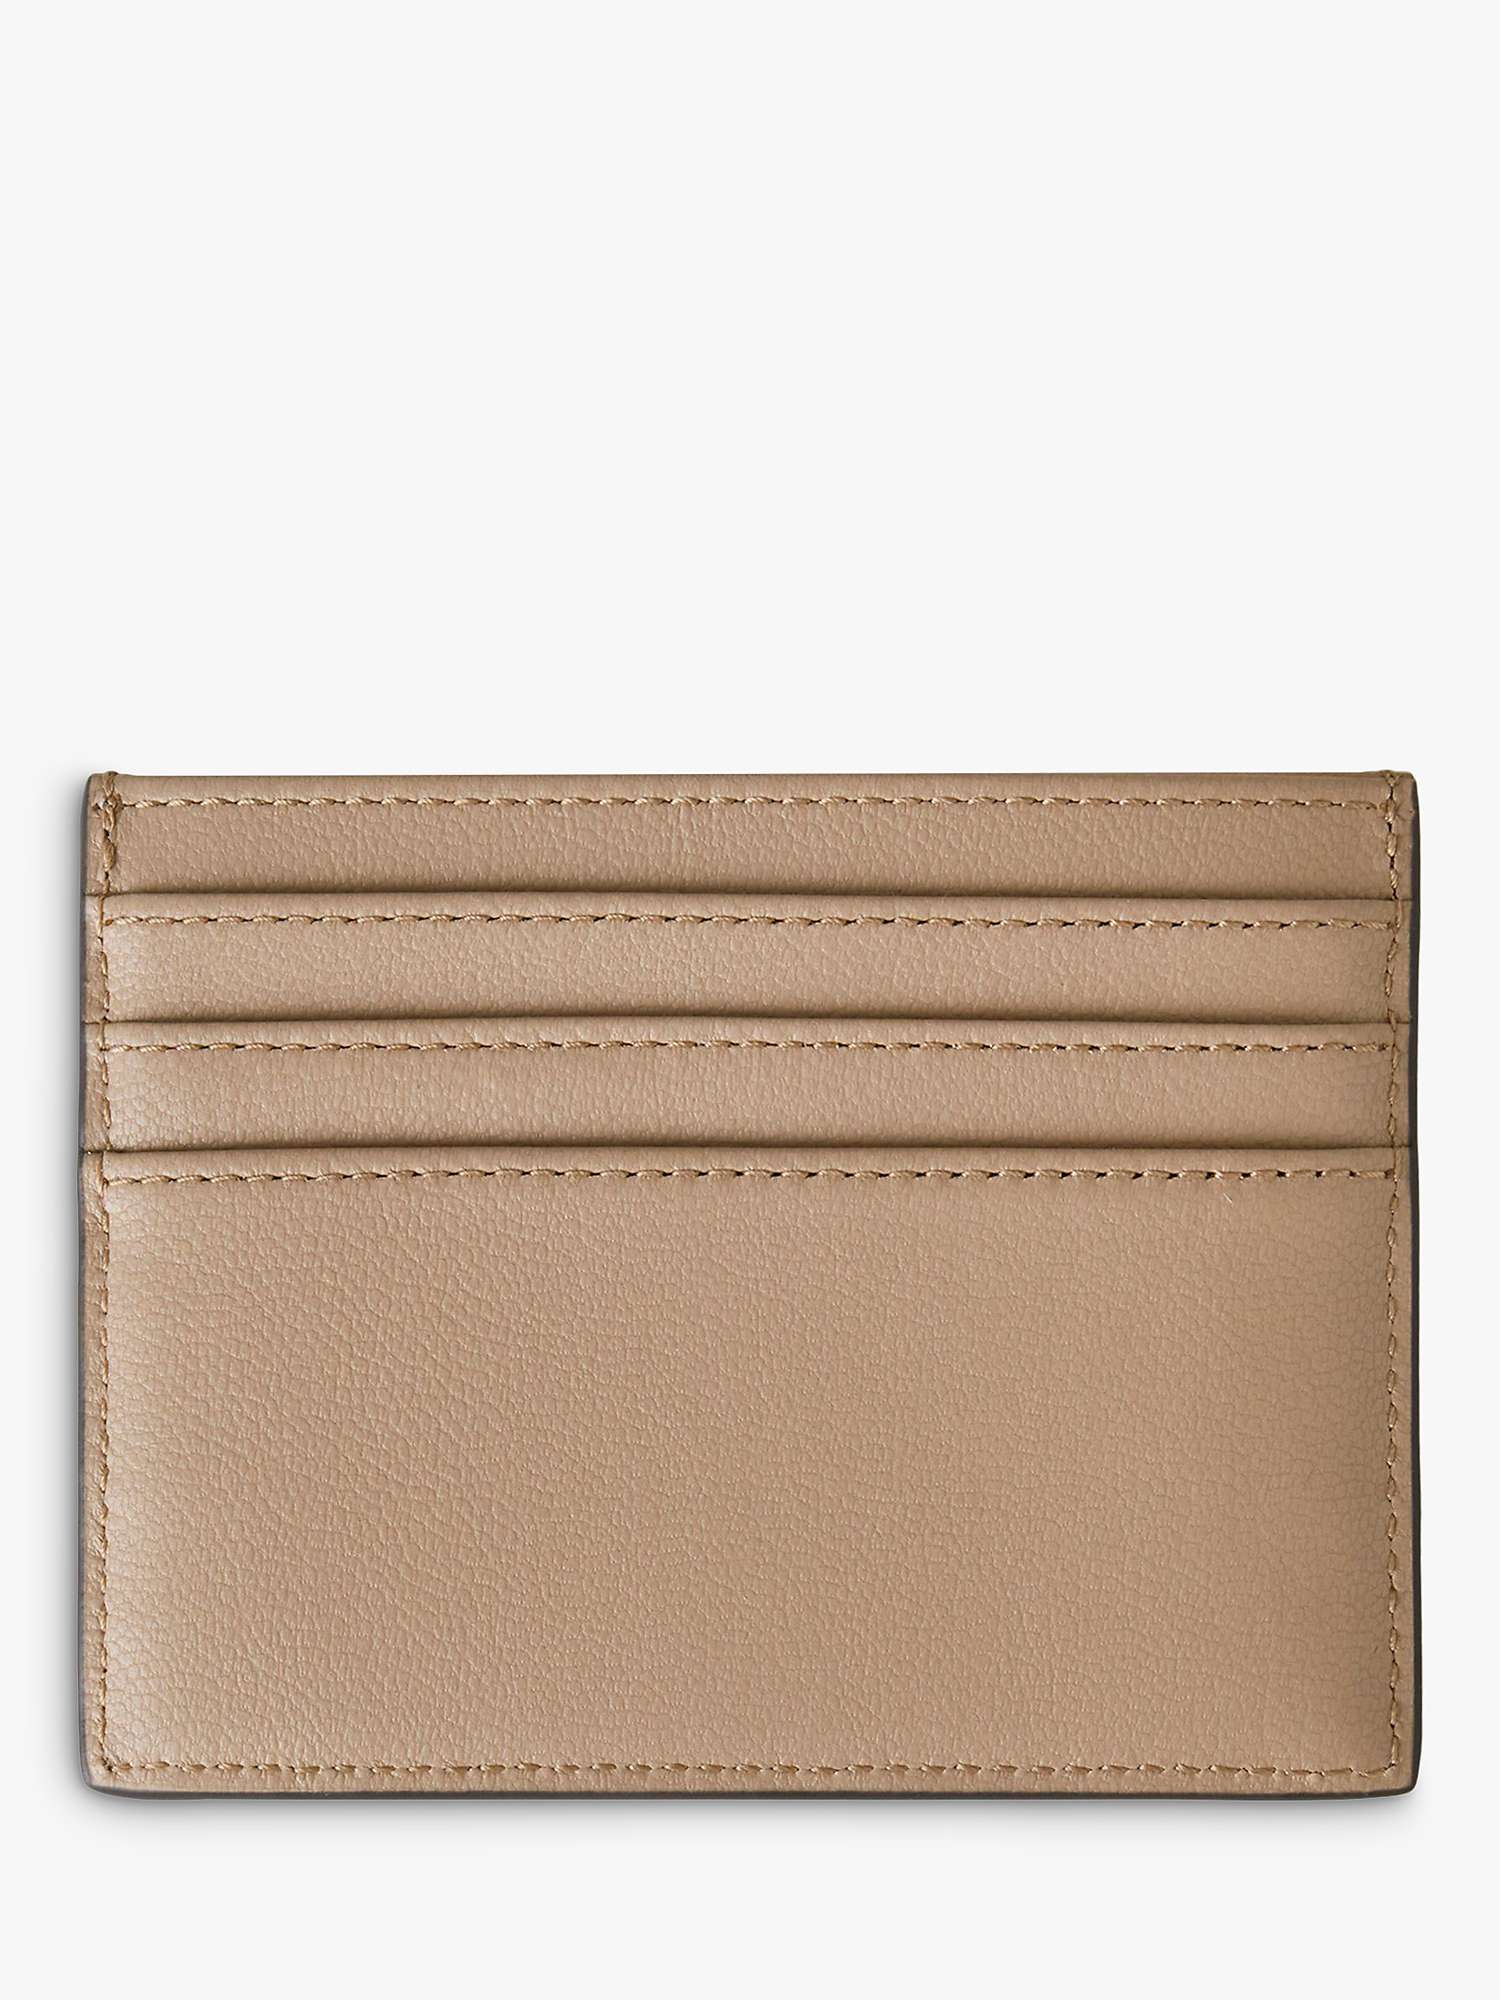 Buy Mulberry Micro Classic Grain Leather Zipped Credit Card Slip Online at johnlewis.com